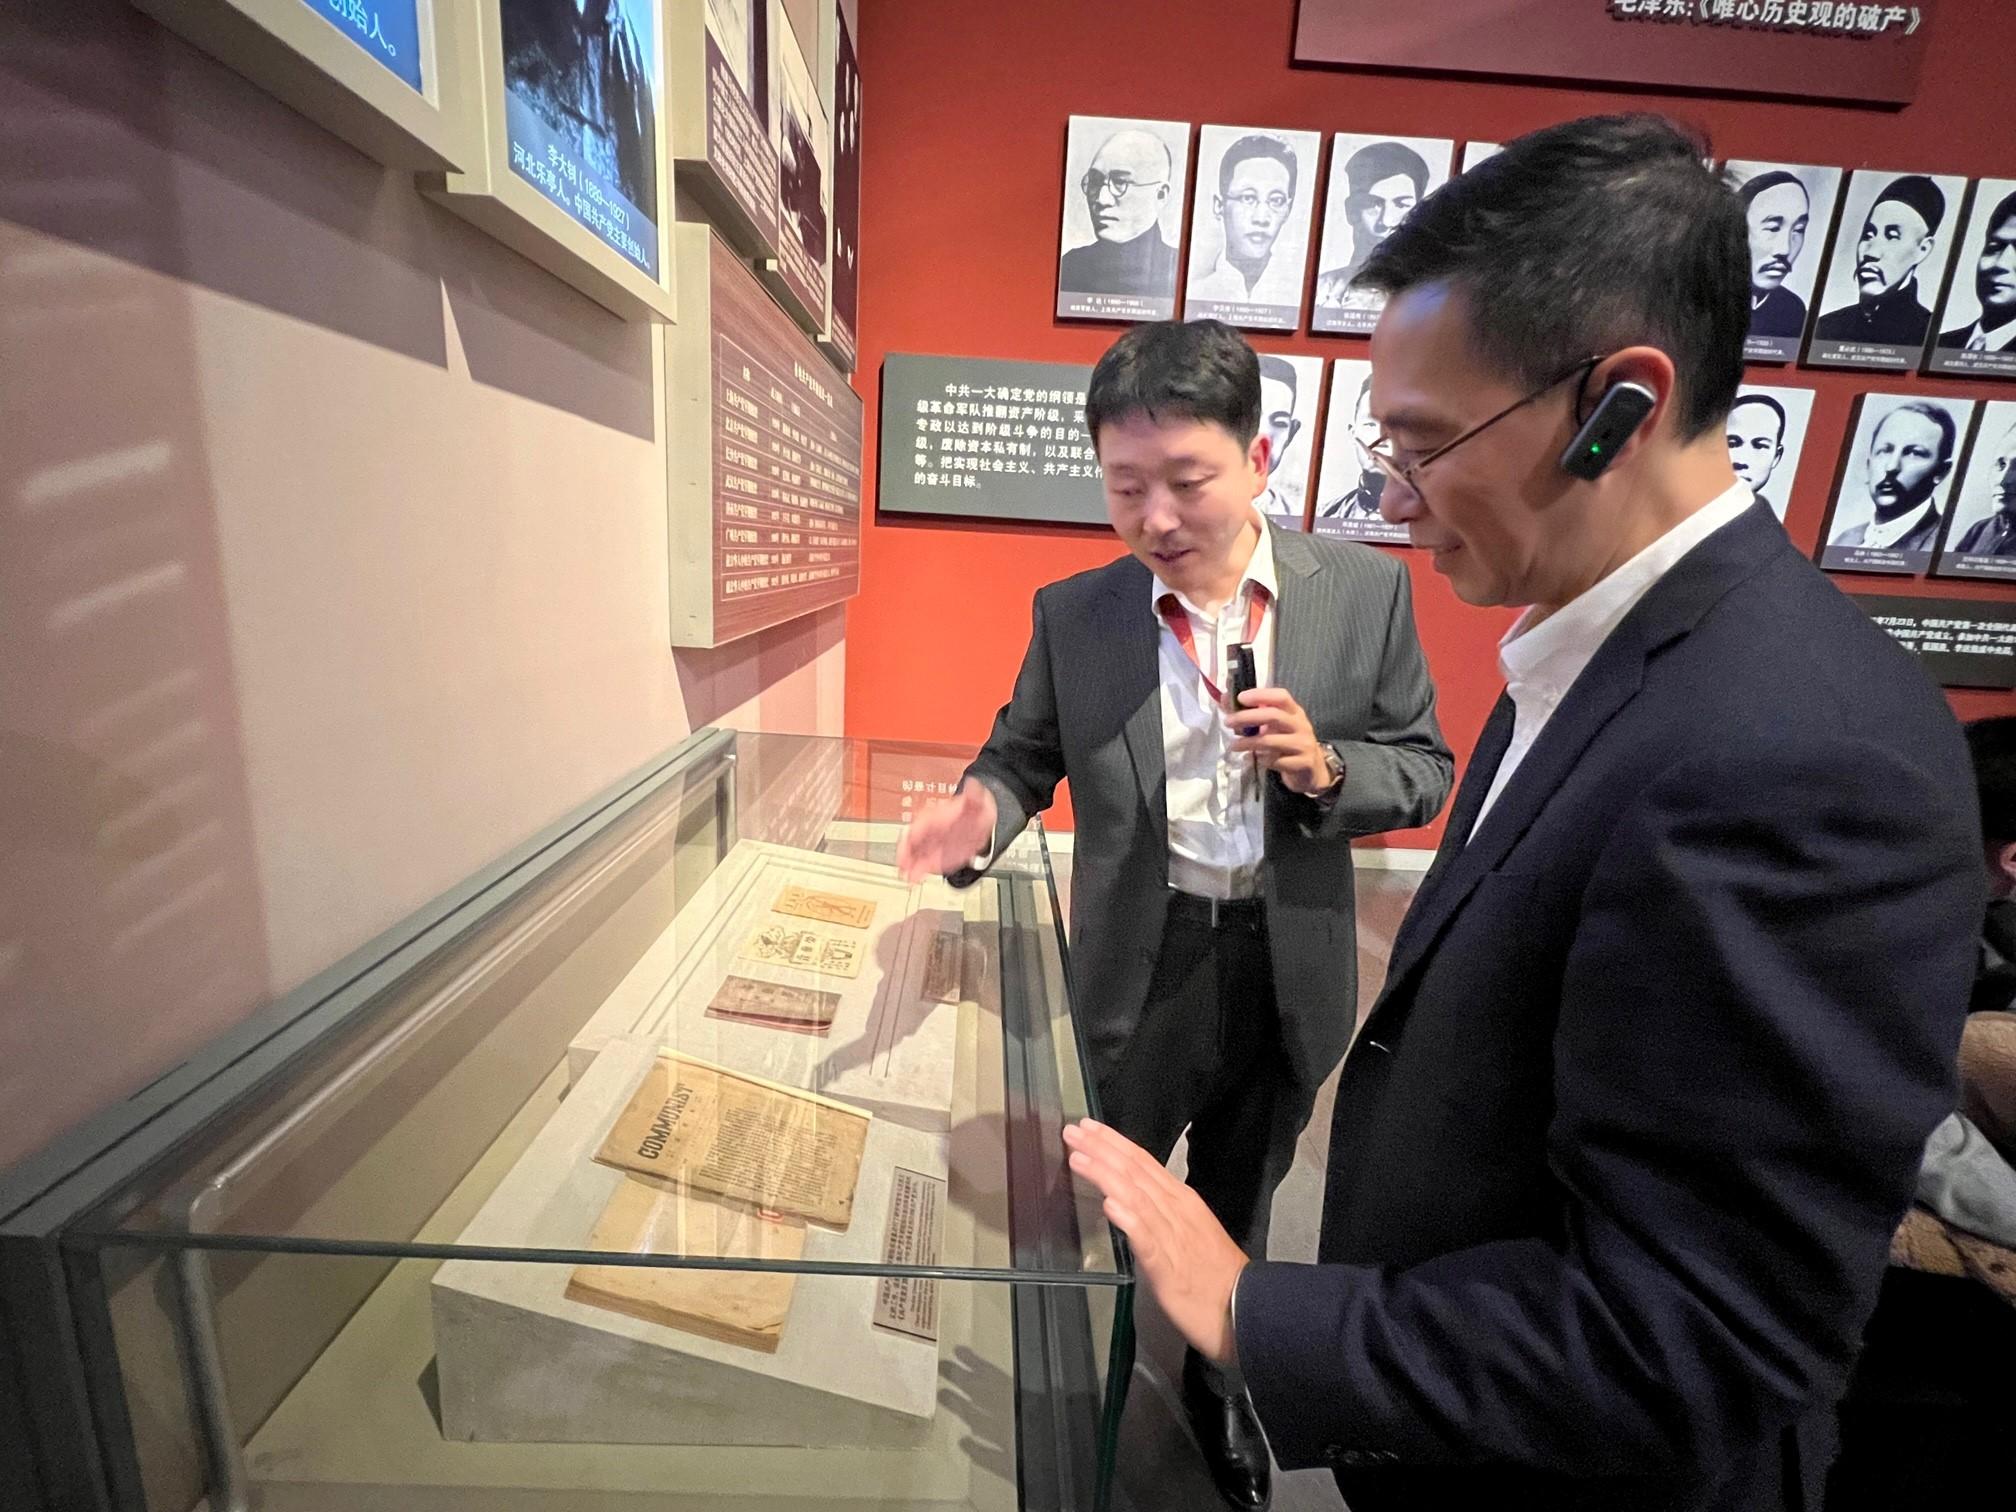 The Secretary for Culture, Sports and Tourism, Mr Kevin Yeung (right), today (November 17) visited "The Road of Rejuvenation" exhibition at the National Museum of China in Beijing.
